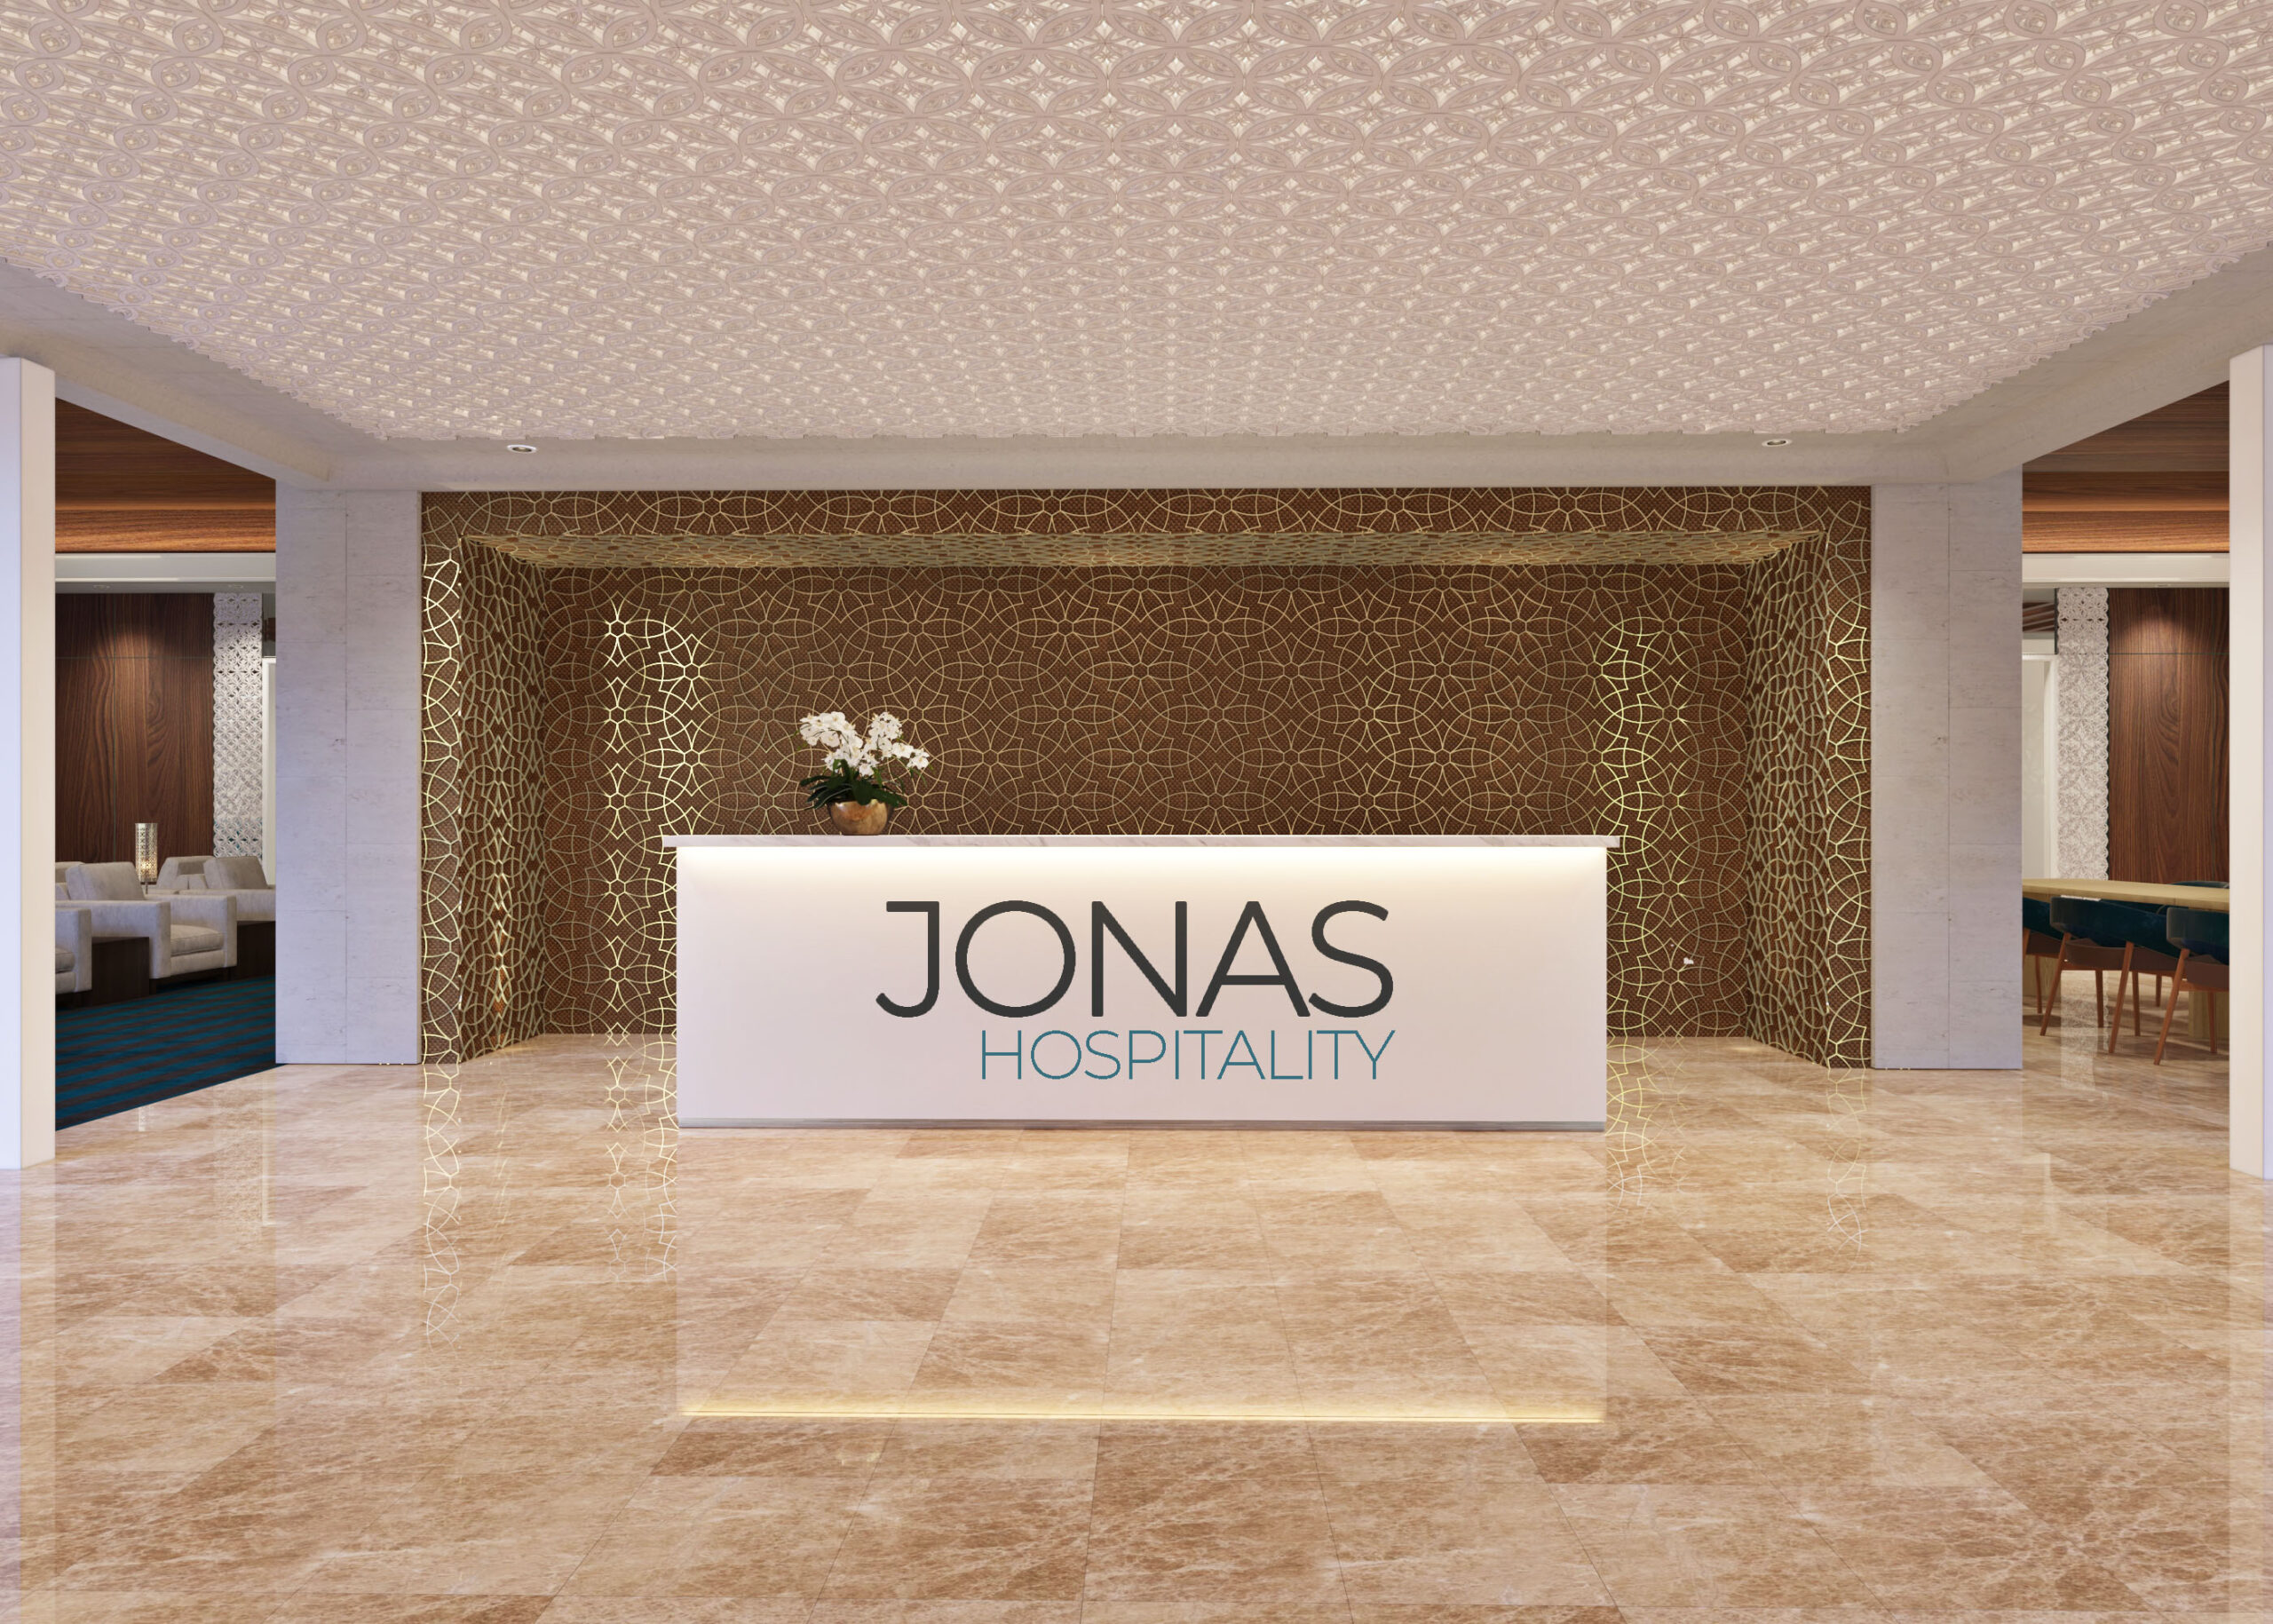 The Story of the Jonas Hospitality Vertical